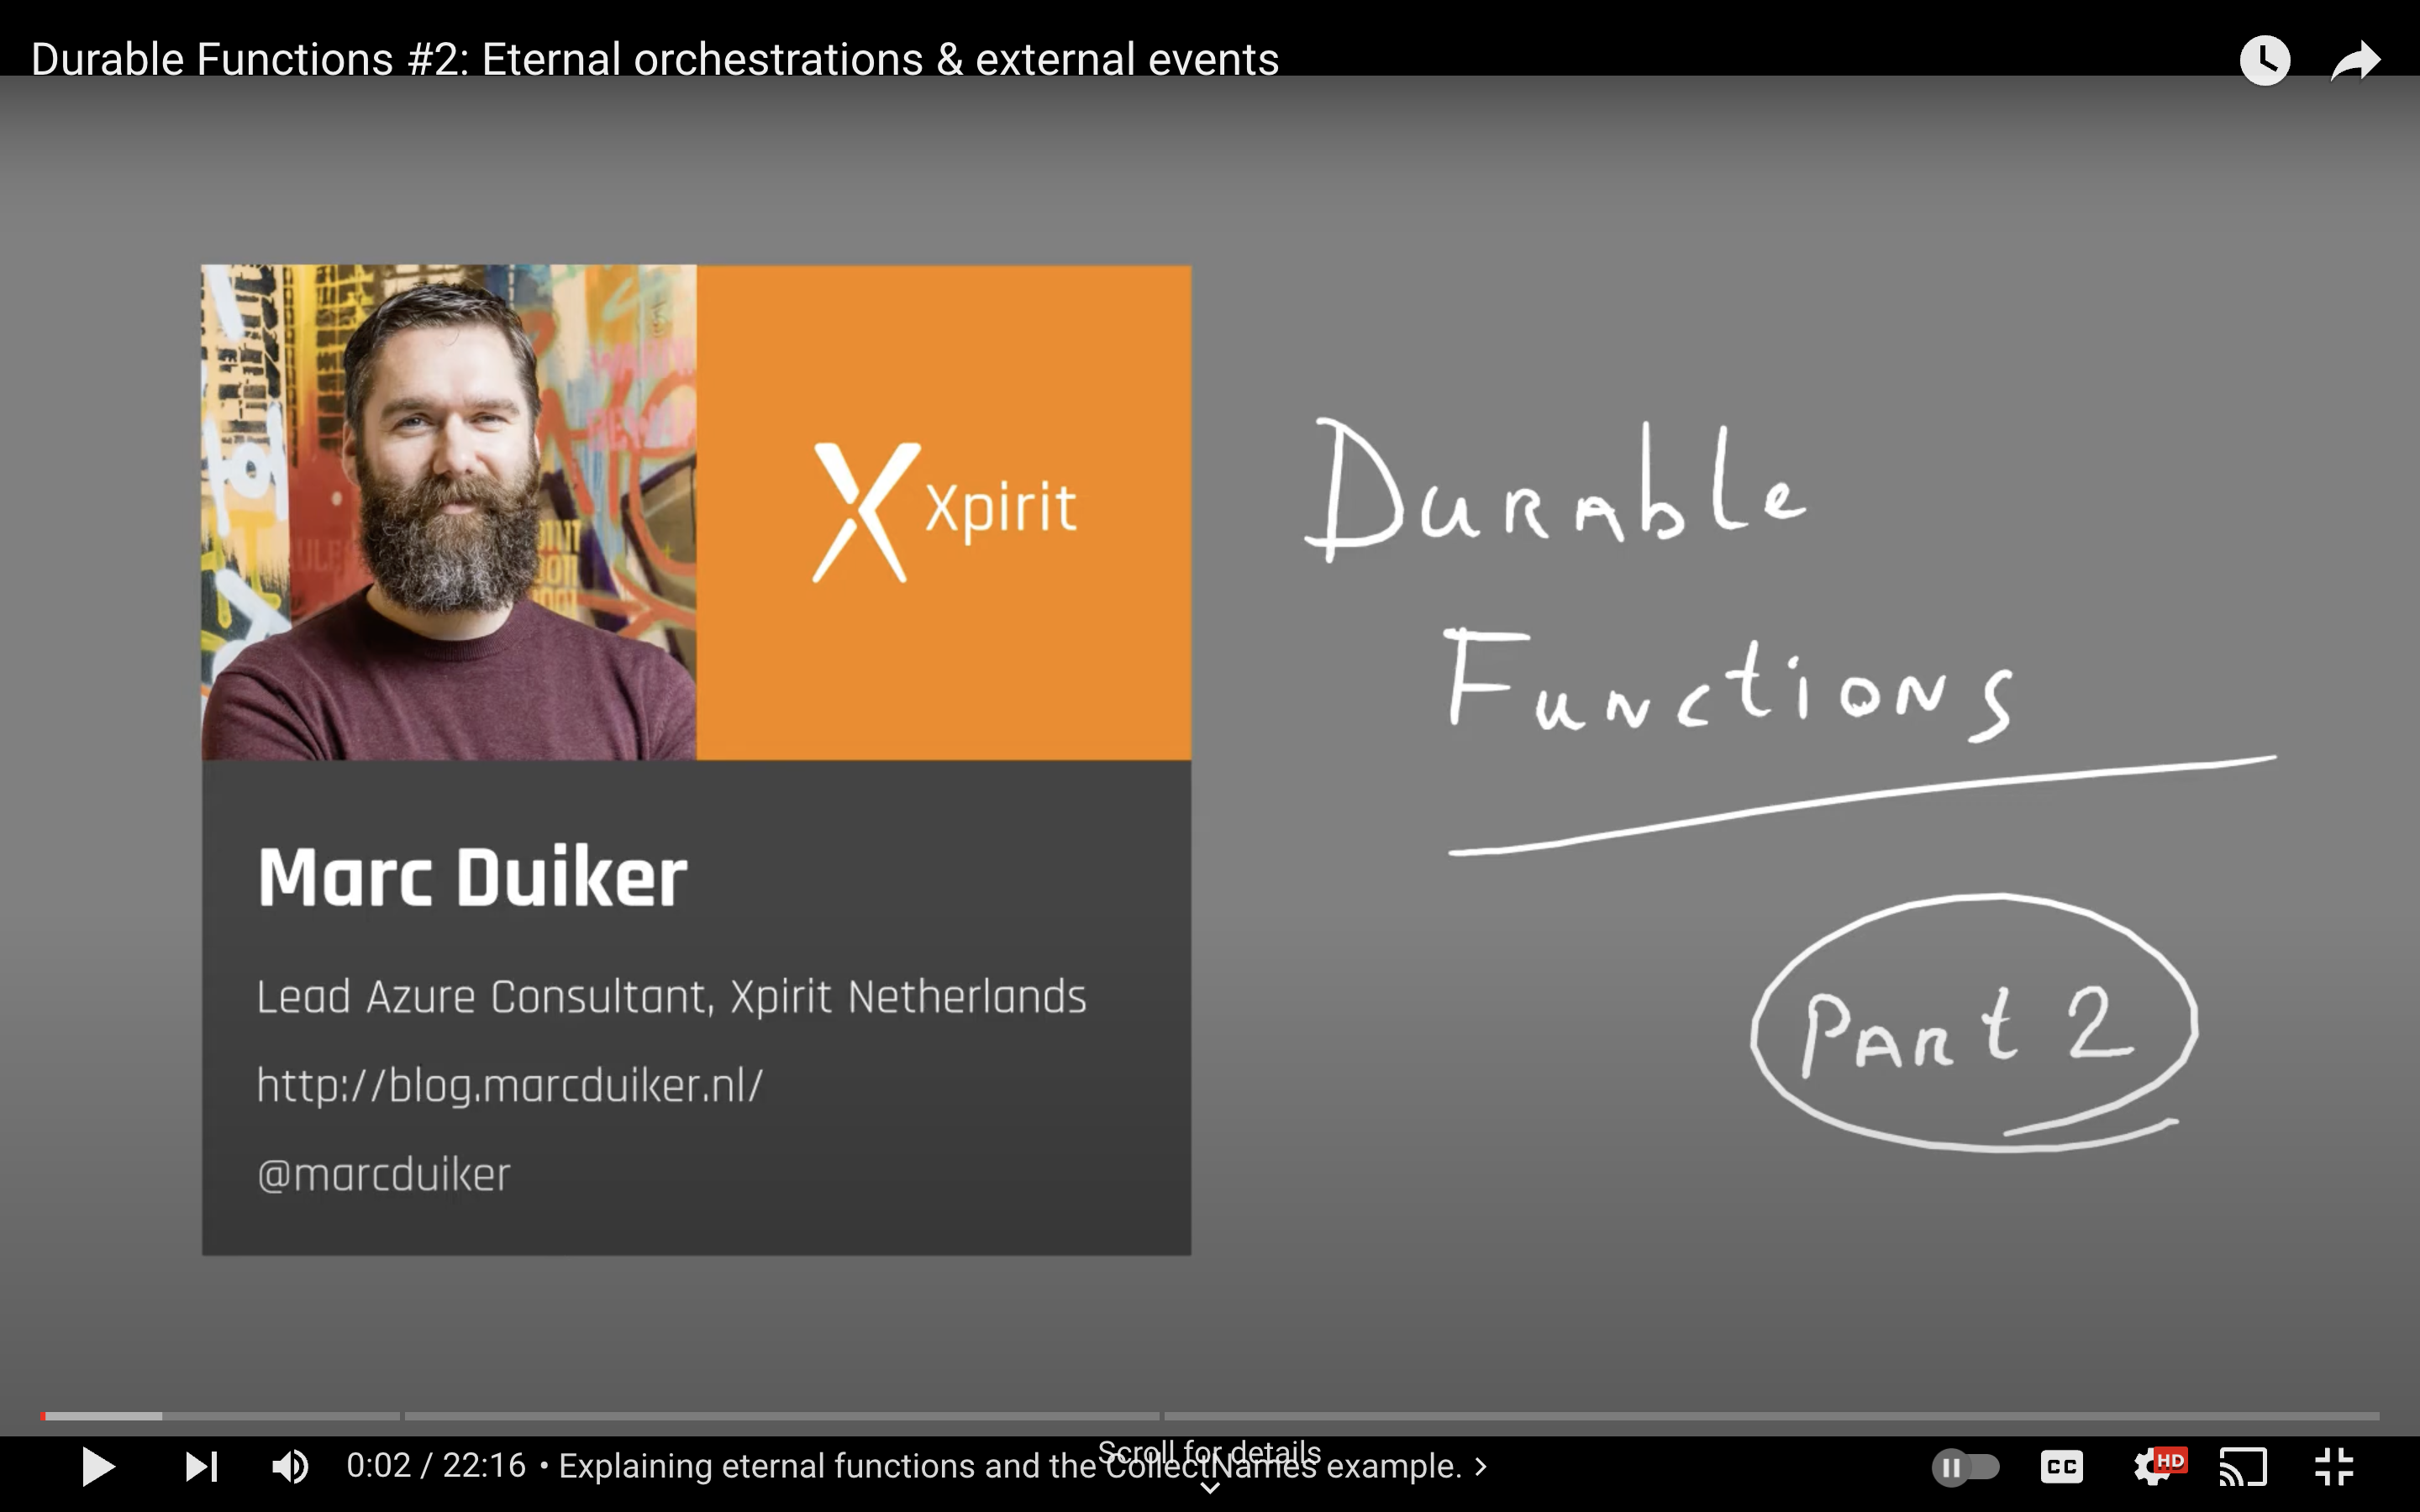 Durable Functions on YouTube (part 2) - Eternal orchestrations & external events